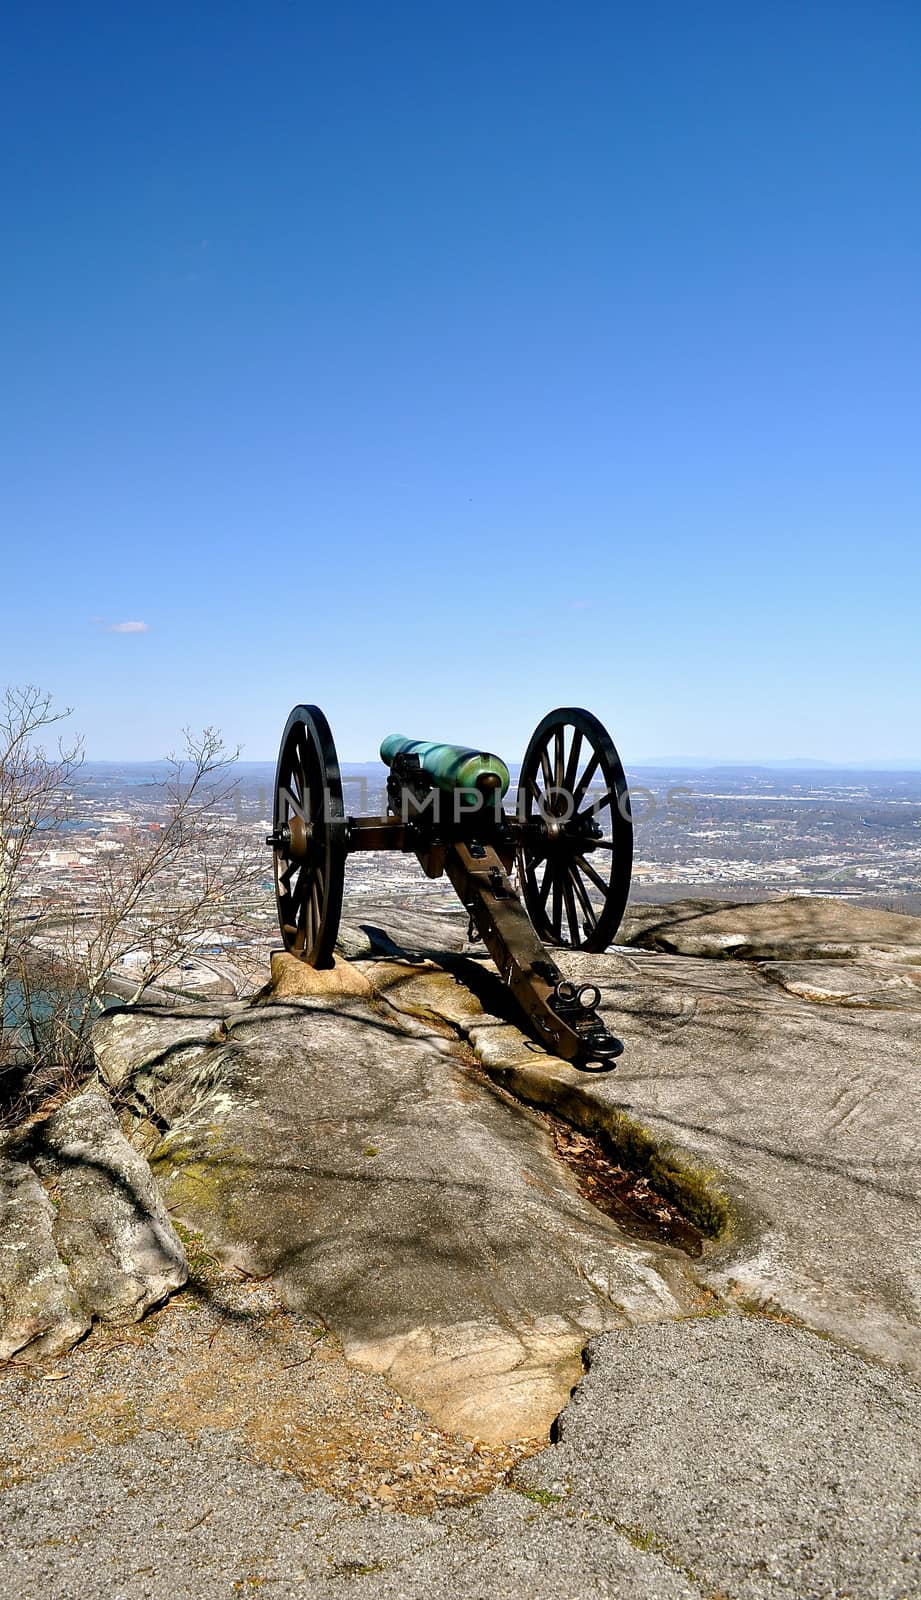 Cannon overlooks Chattanooga by RefocusPhoto